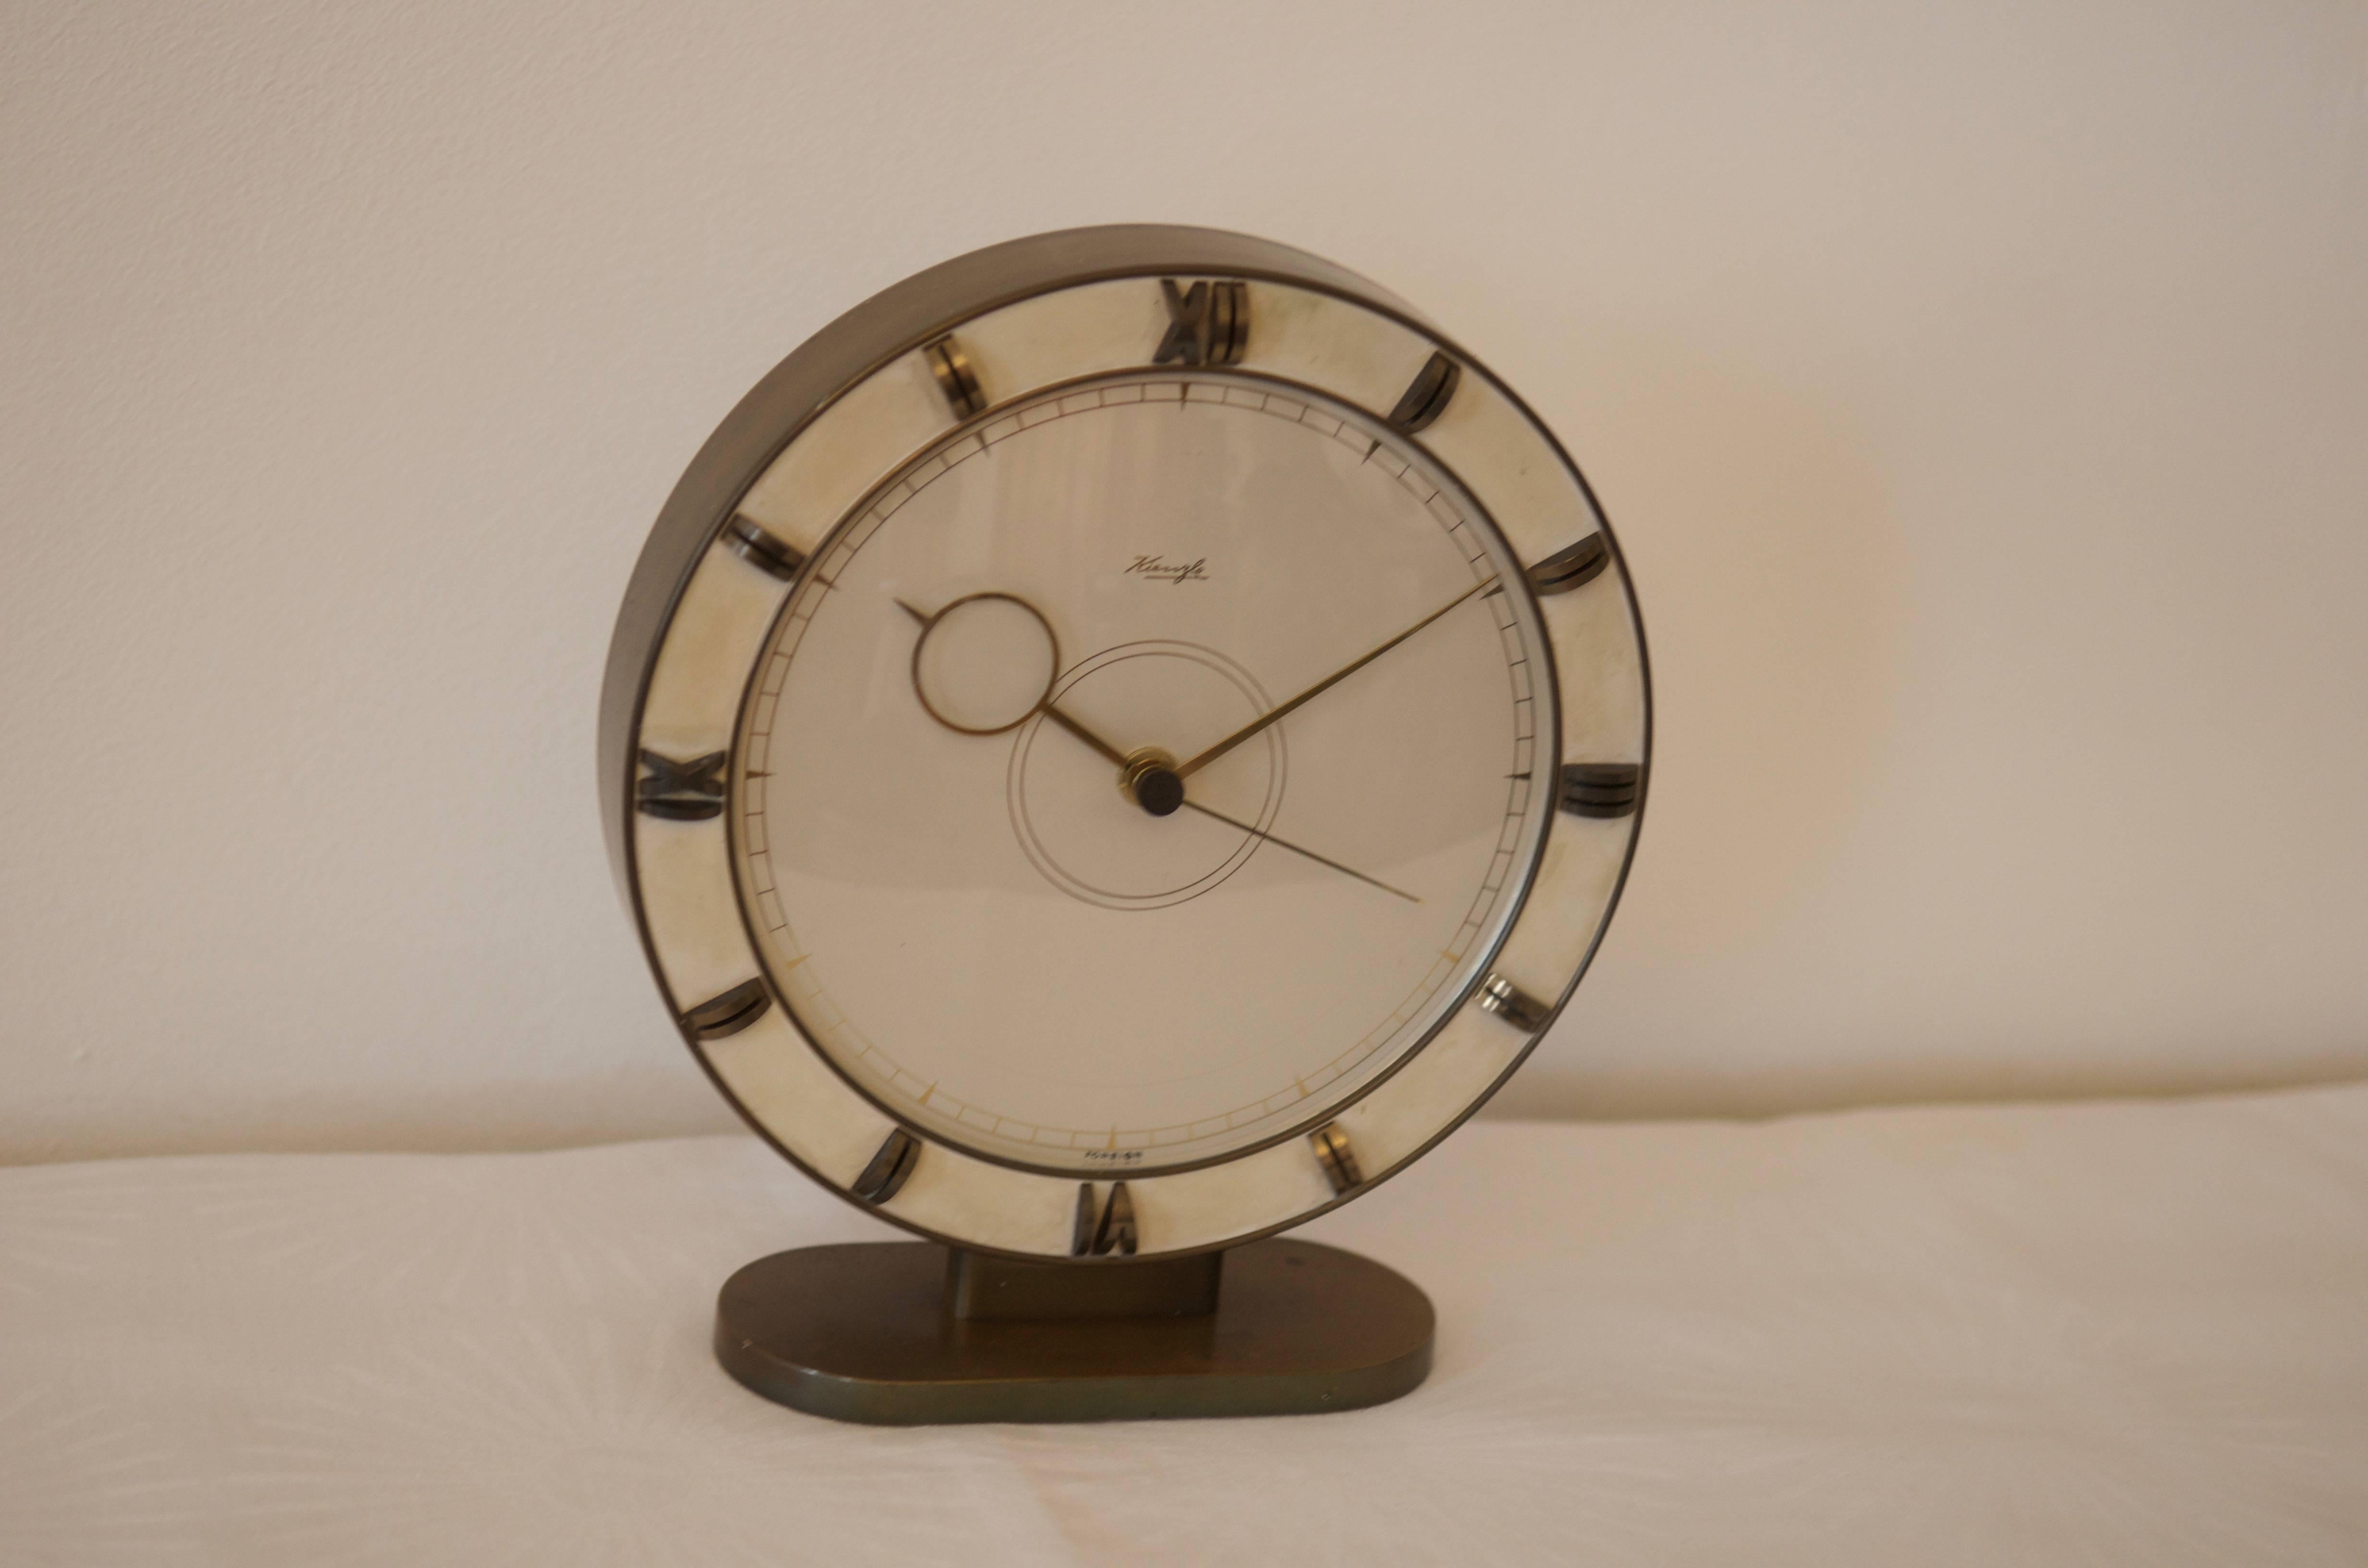 Designed by Heinrich Möller in the 1930s for Kienzle.
Original movement replaced to a modern quartz movement with a battery.
The clock is in perfect condition, no major scratches, no glass scratched.
Glass cover.